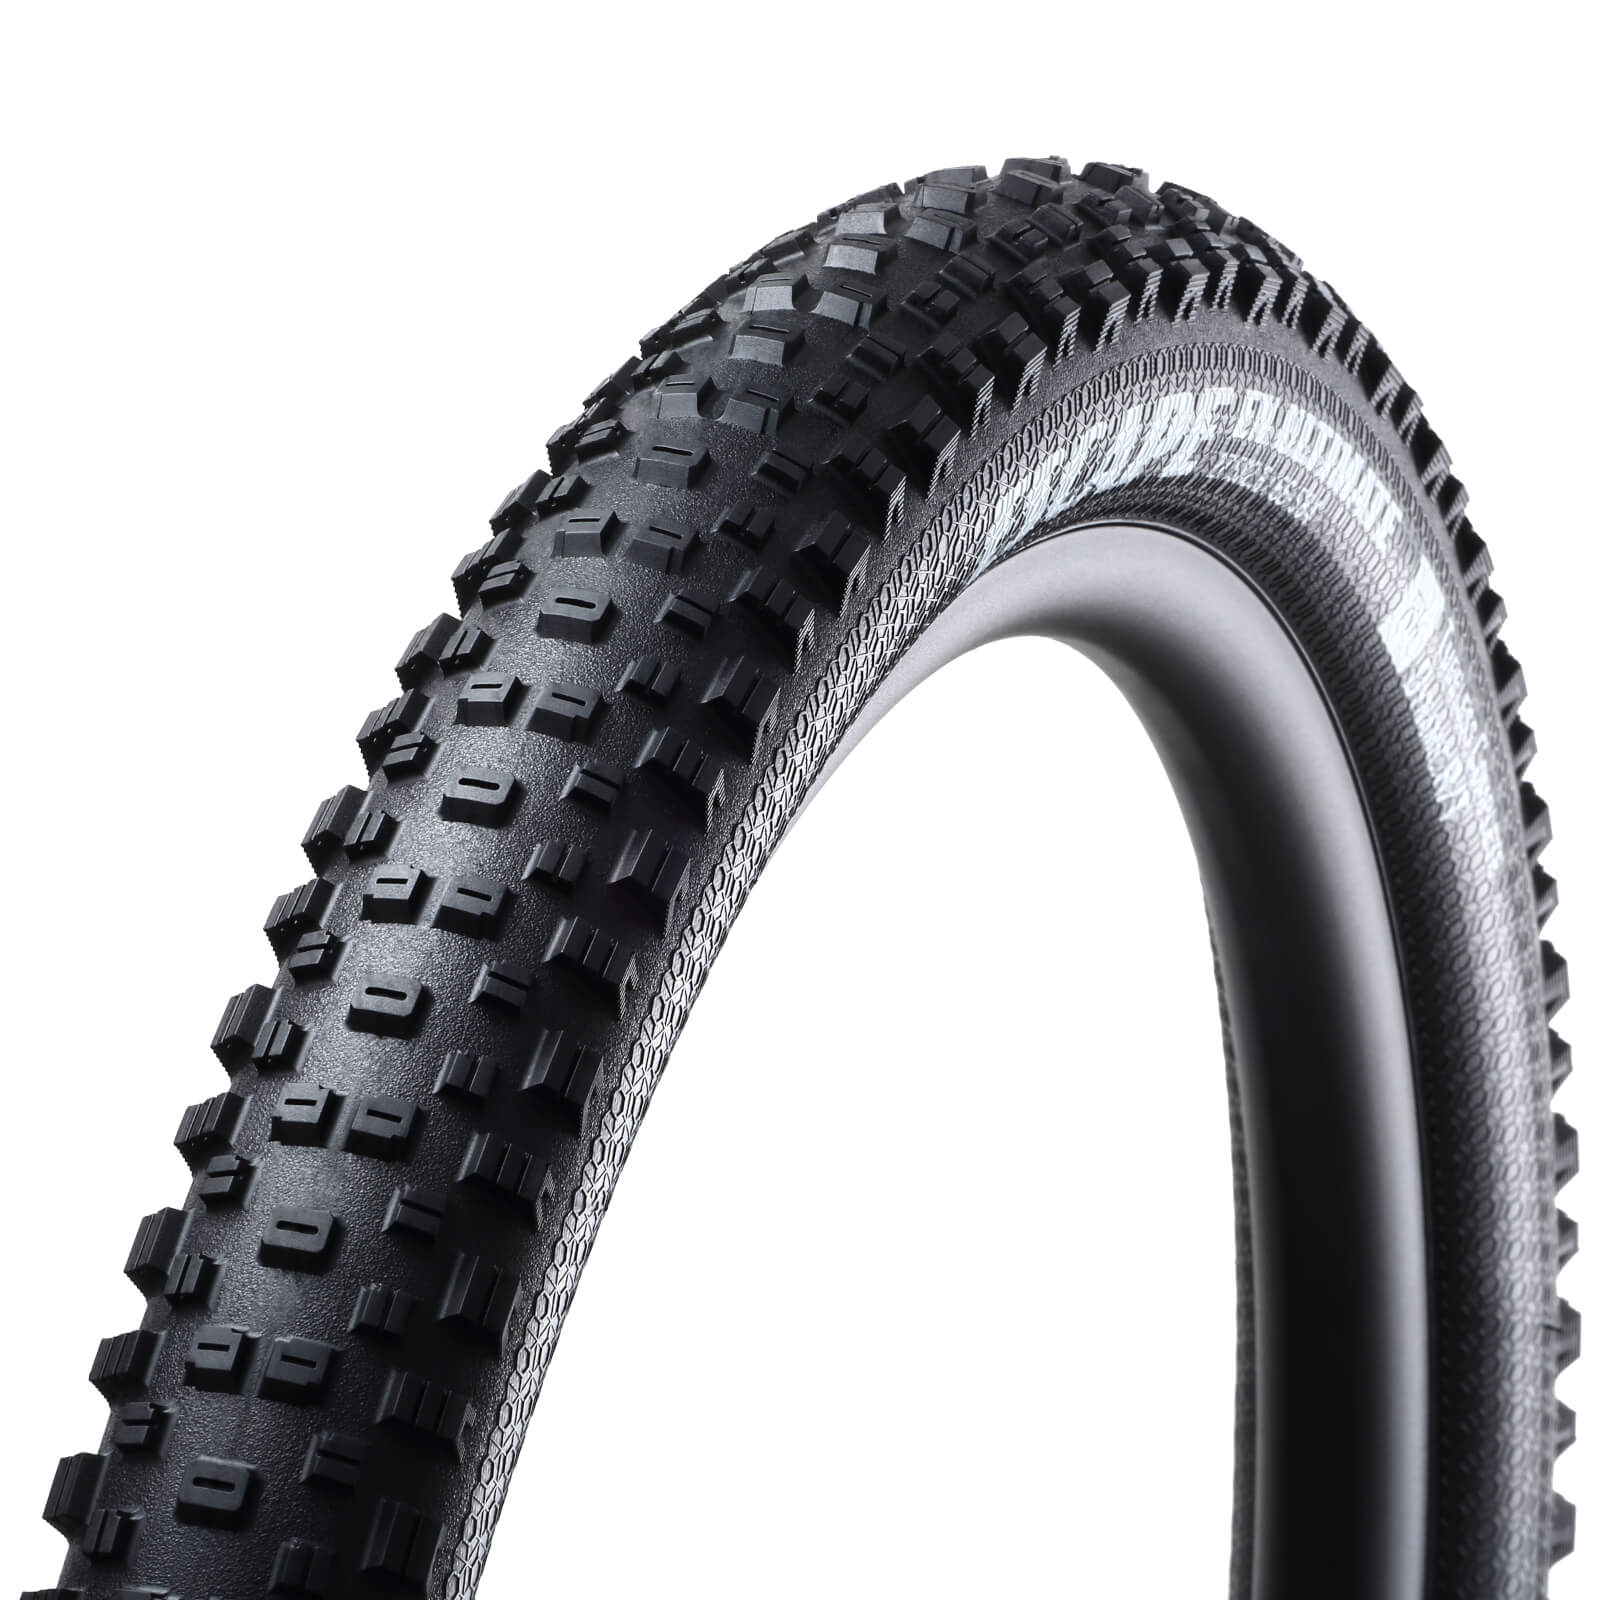 Goodyear Escape Ultimate Tubeless MTB Tyre - 27.5in x 2.60 - Black